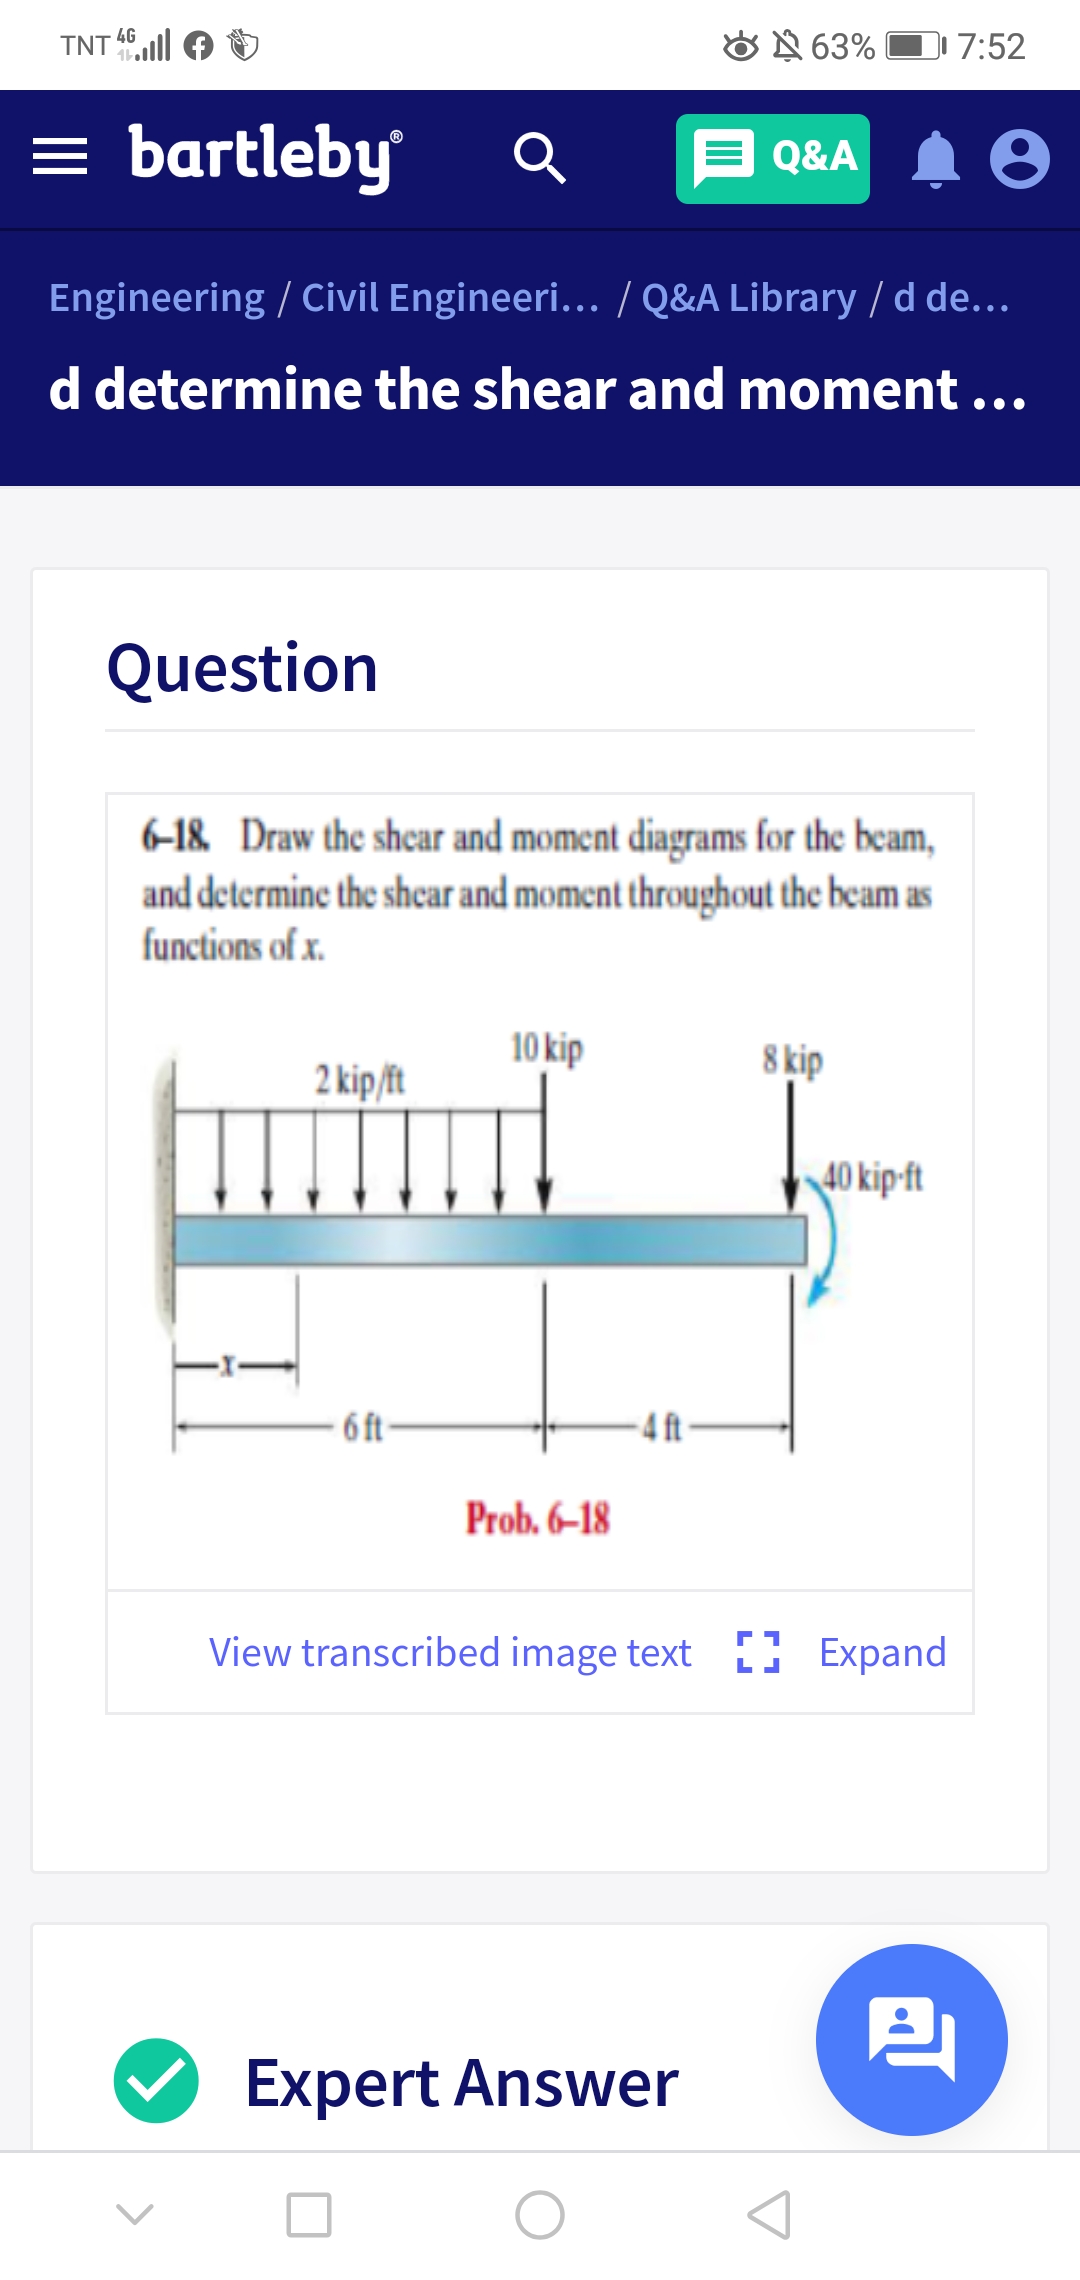 4G
TNT
O N 63% O 7:52
= bartleby
Q&A 1 0
Engineering / Civil Engineeri... / Q&A Library / d de...
d determine the shear and moment ...
Question
6-18. Draw the shcar and moment diagrams for the beam,
and determine the shear and moment throughout the beam as
functions of x.
10 kip
8 kip
2 kip/ft
40 kip-ft
- 6 t-
-4 ft-
Prob. 6–18
View transcribed image text D Expand
Expert Answer
